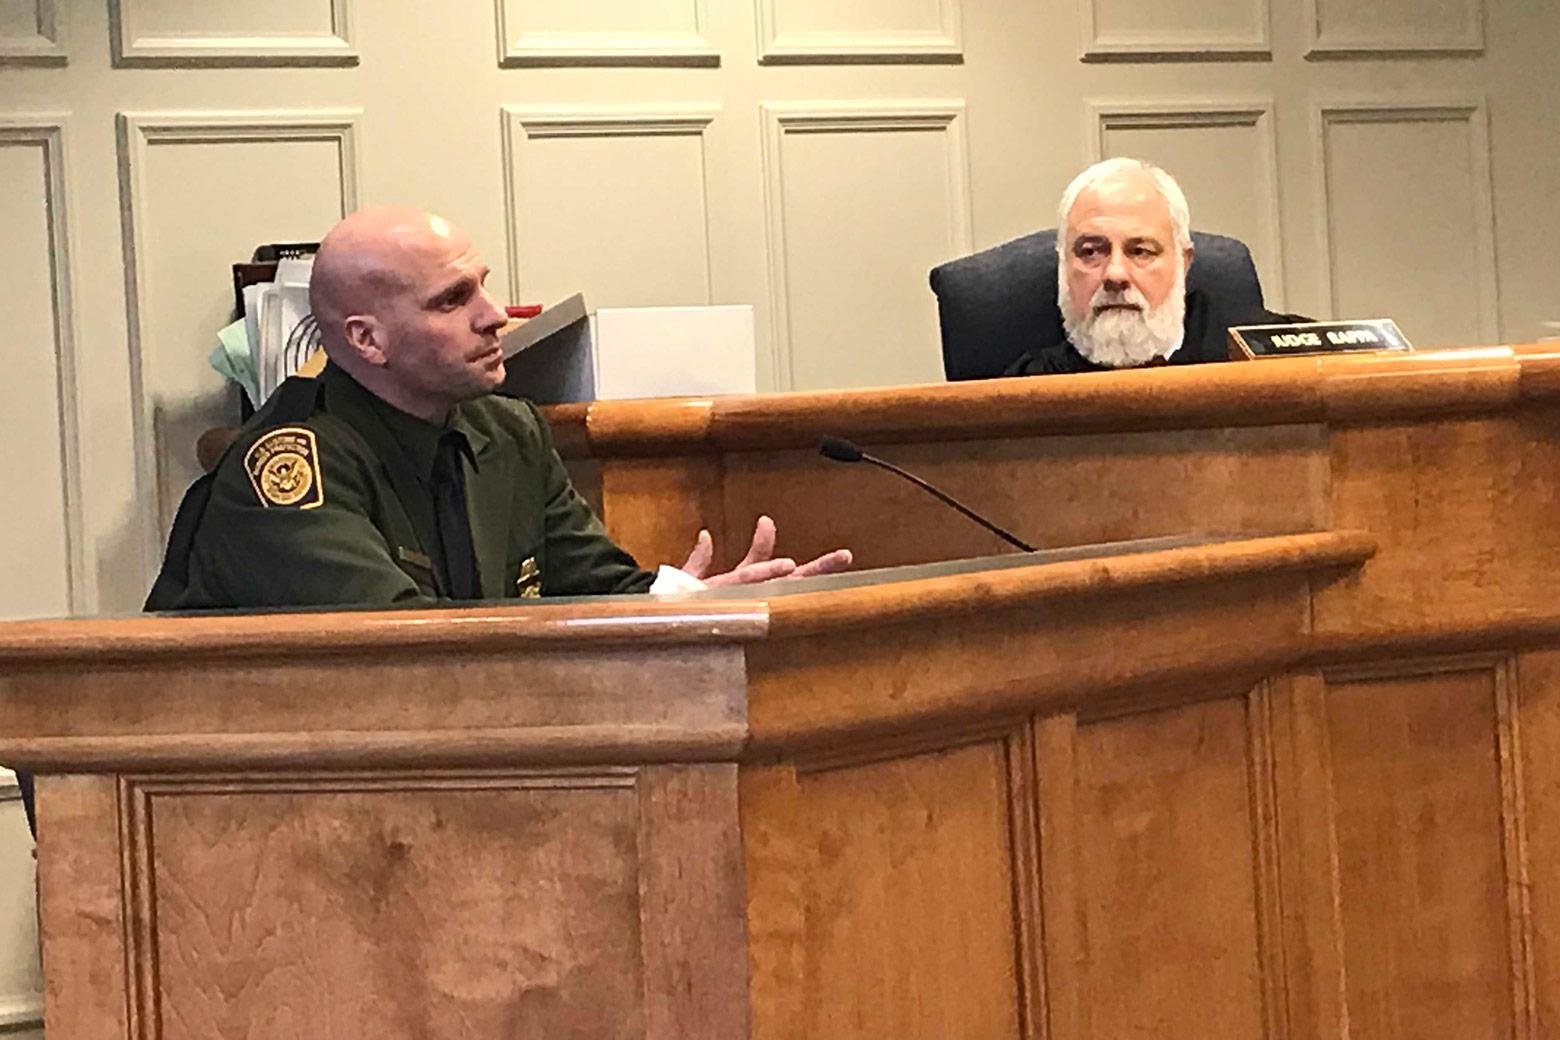 Customs and Border Protection Officer Mark Qualter testifies in Plymouth District Court as Judge Thomas Rappa looks on.  Photo by Mark Joseph Stern.